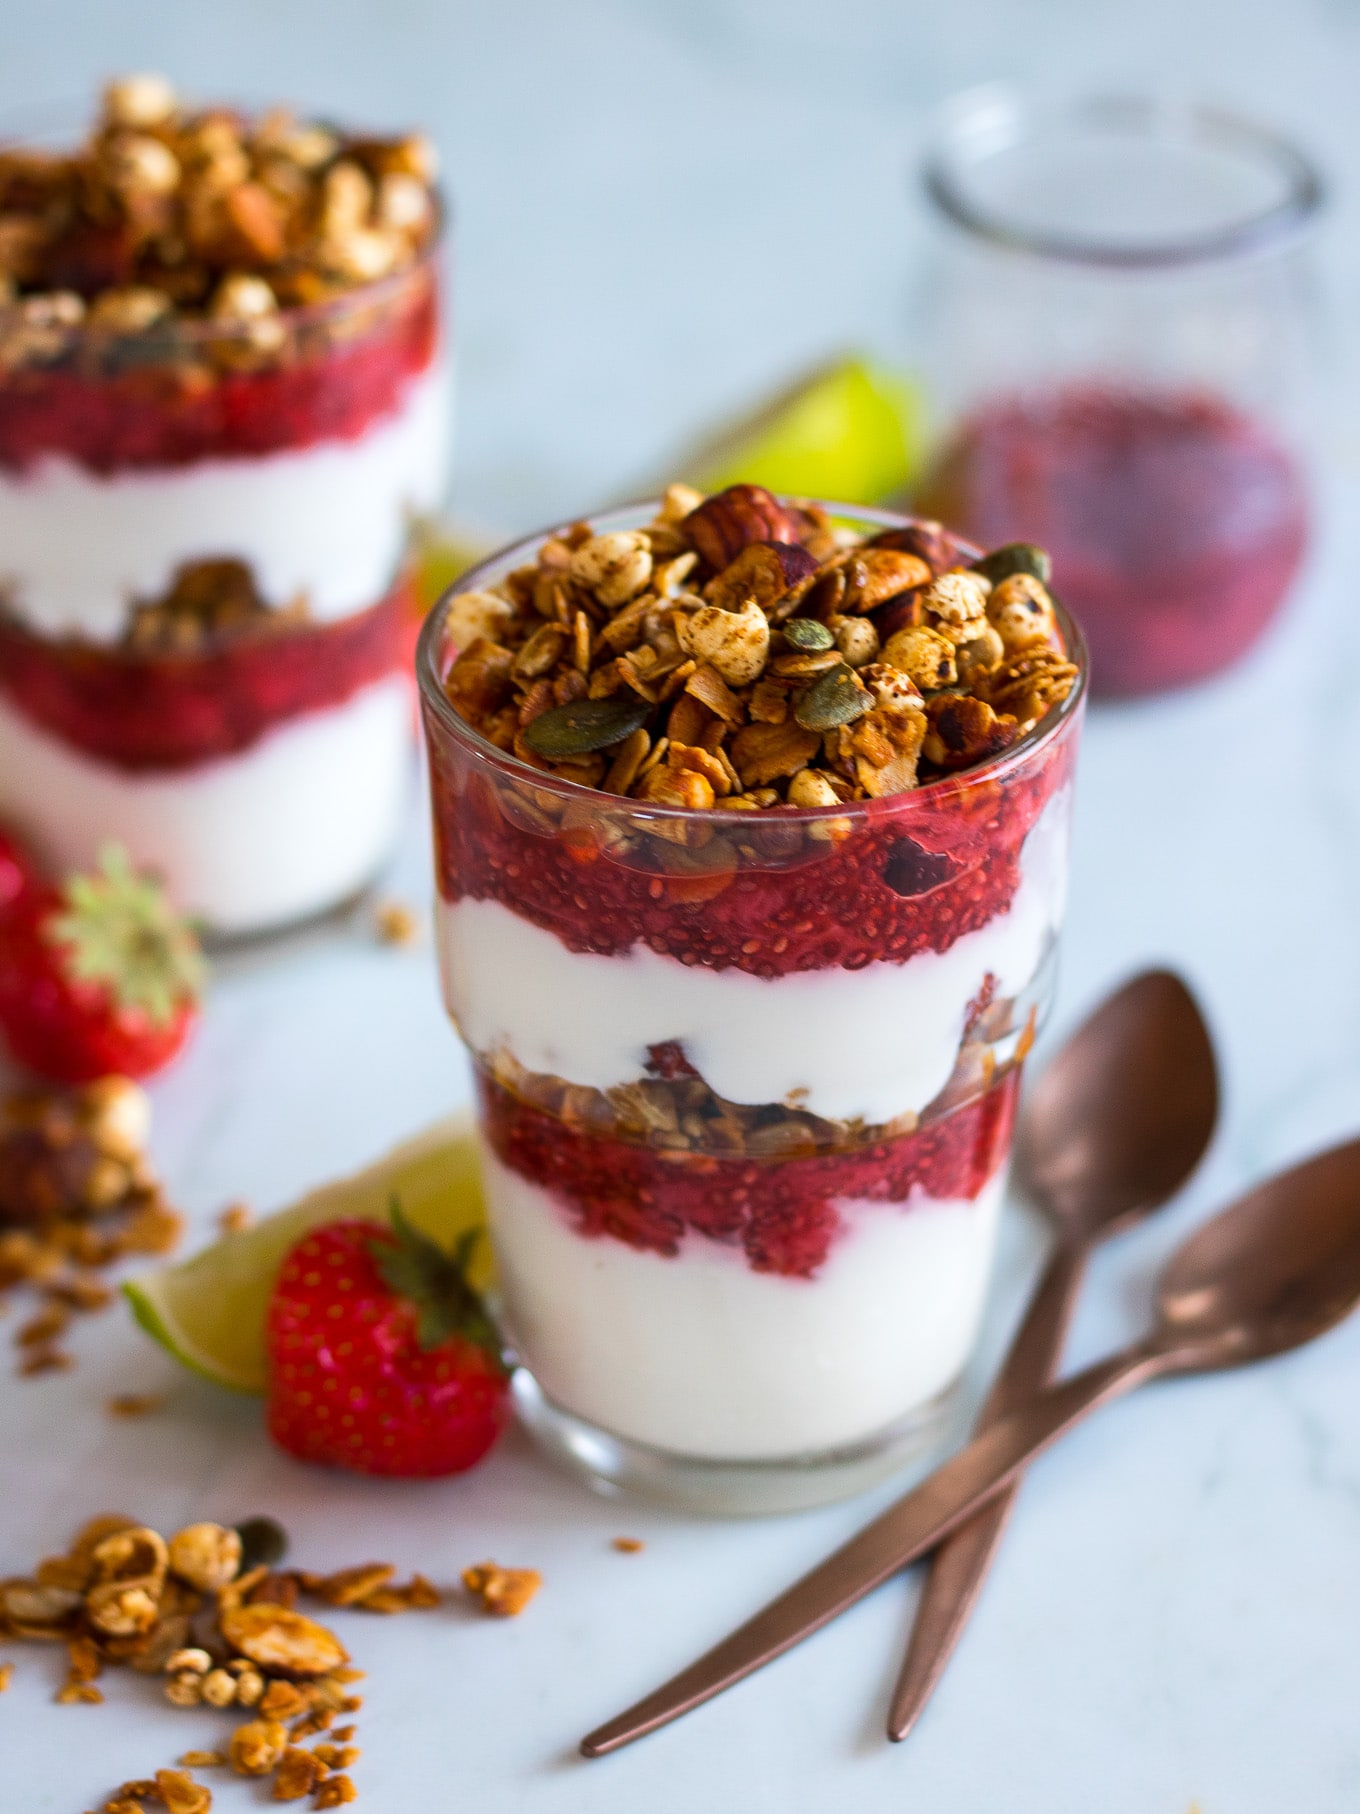 Strawberry Lime Chia Yoghurt Parfaits make a beautiful but simple breakfast, snack or even a healthy dessert! They’re perfect to meal prep and can be made gluten free and dairy free too.